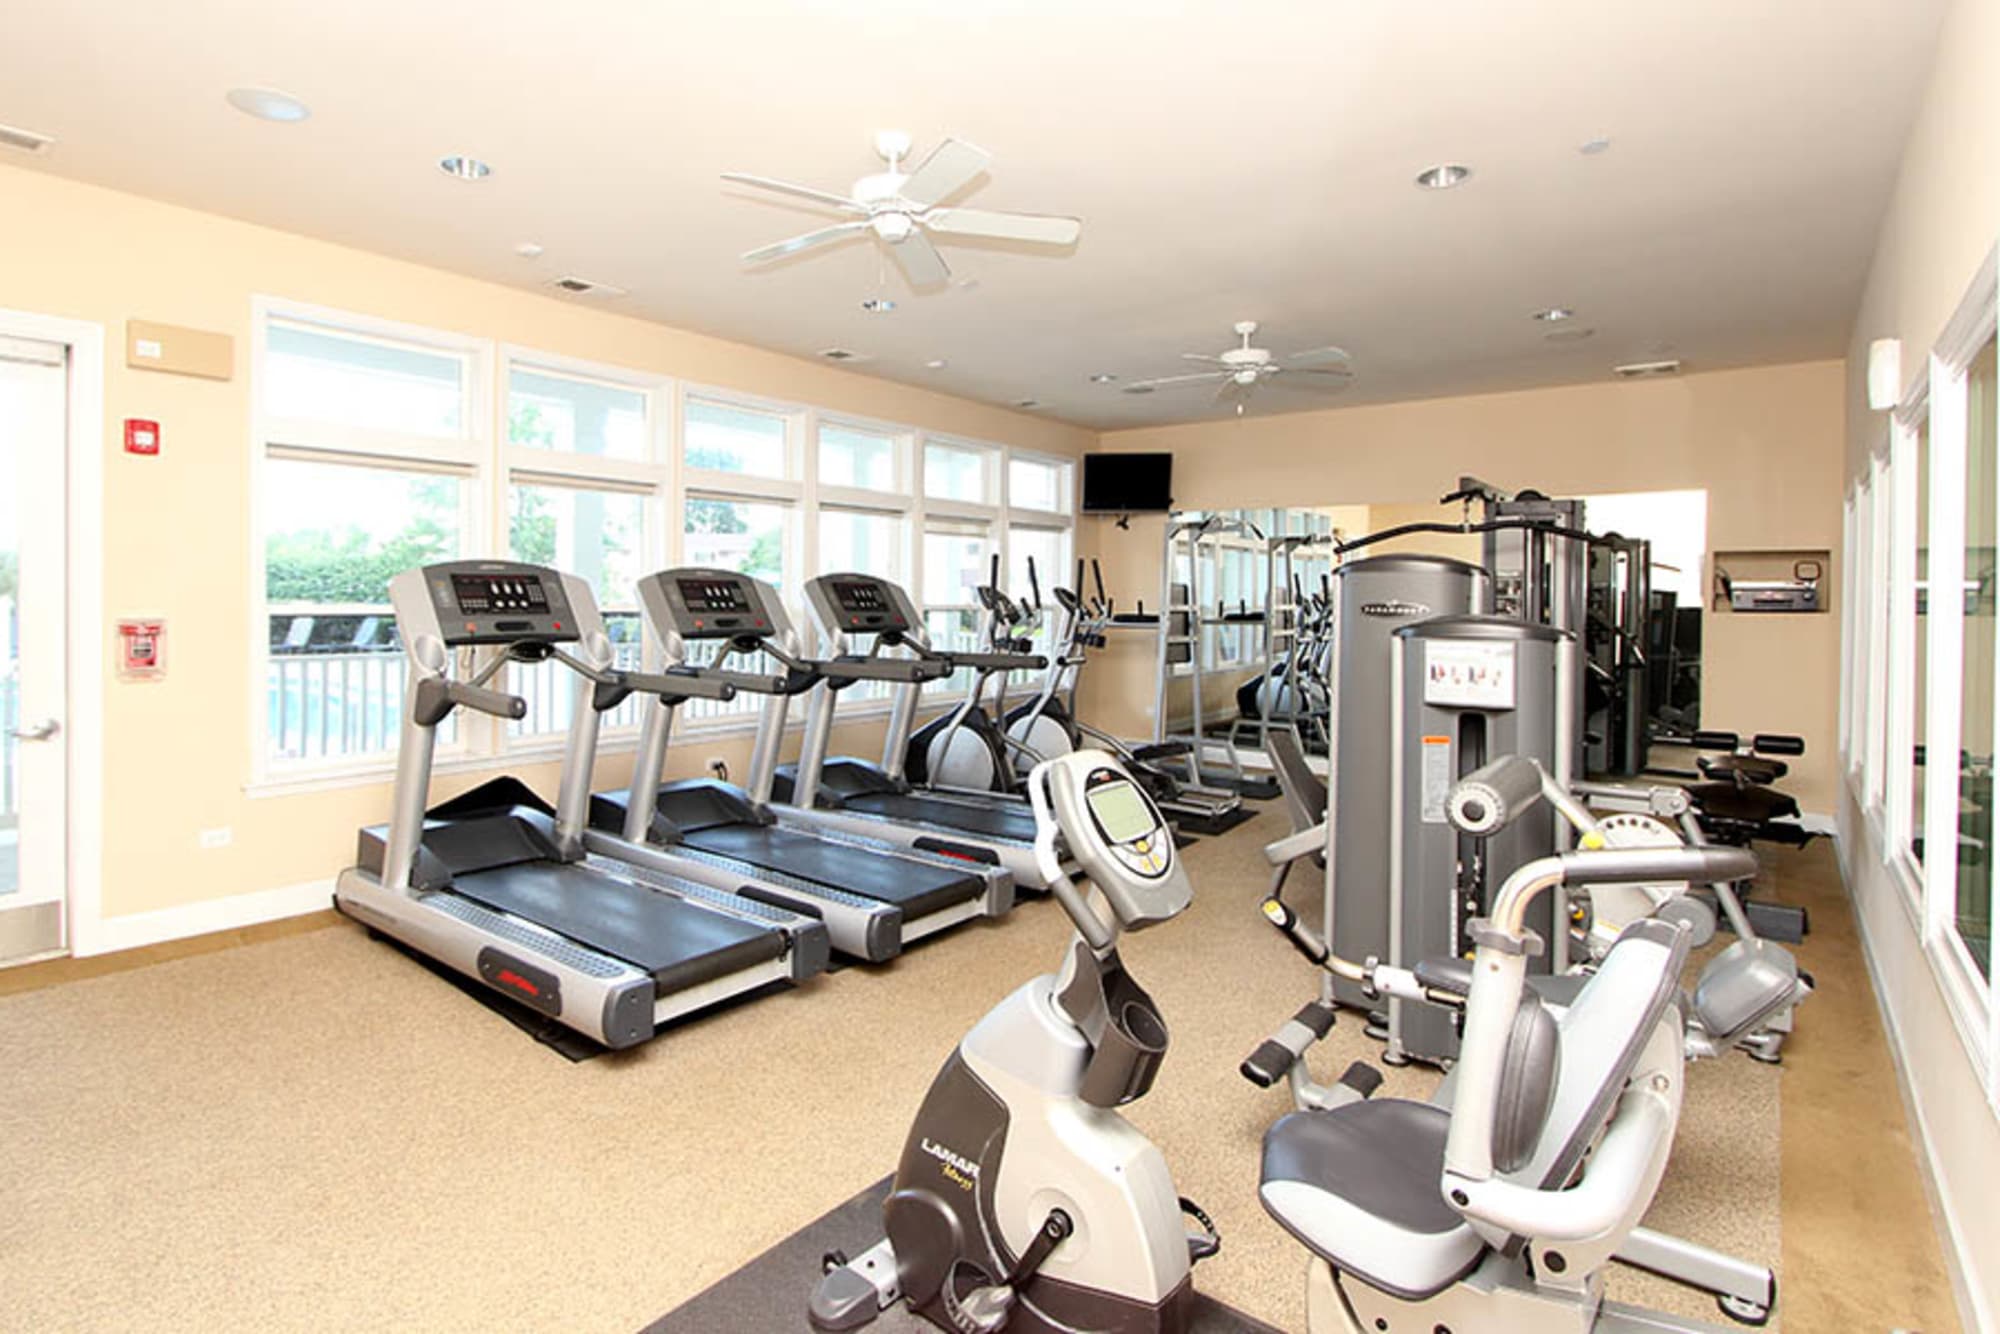 Fitness center at Riverstone Apartments in Bolingbrook, Illinois